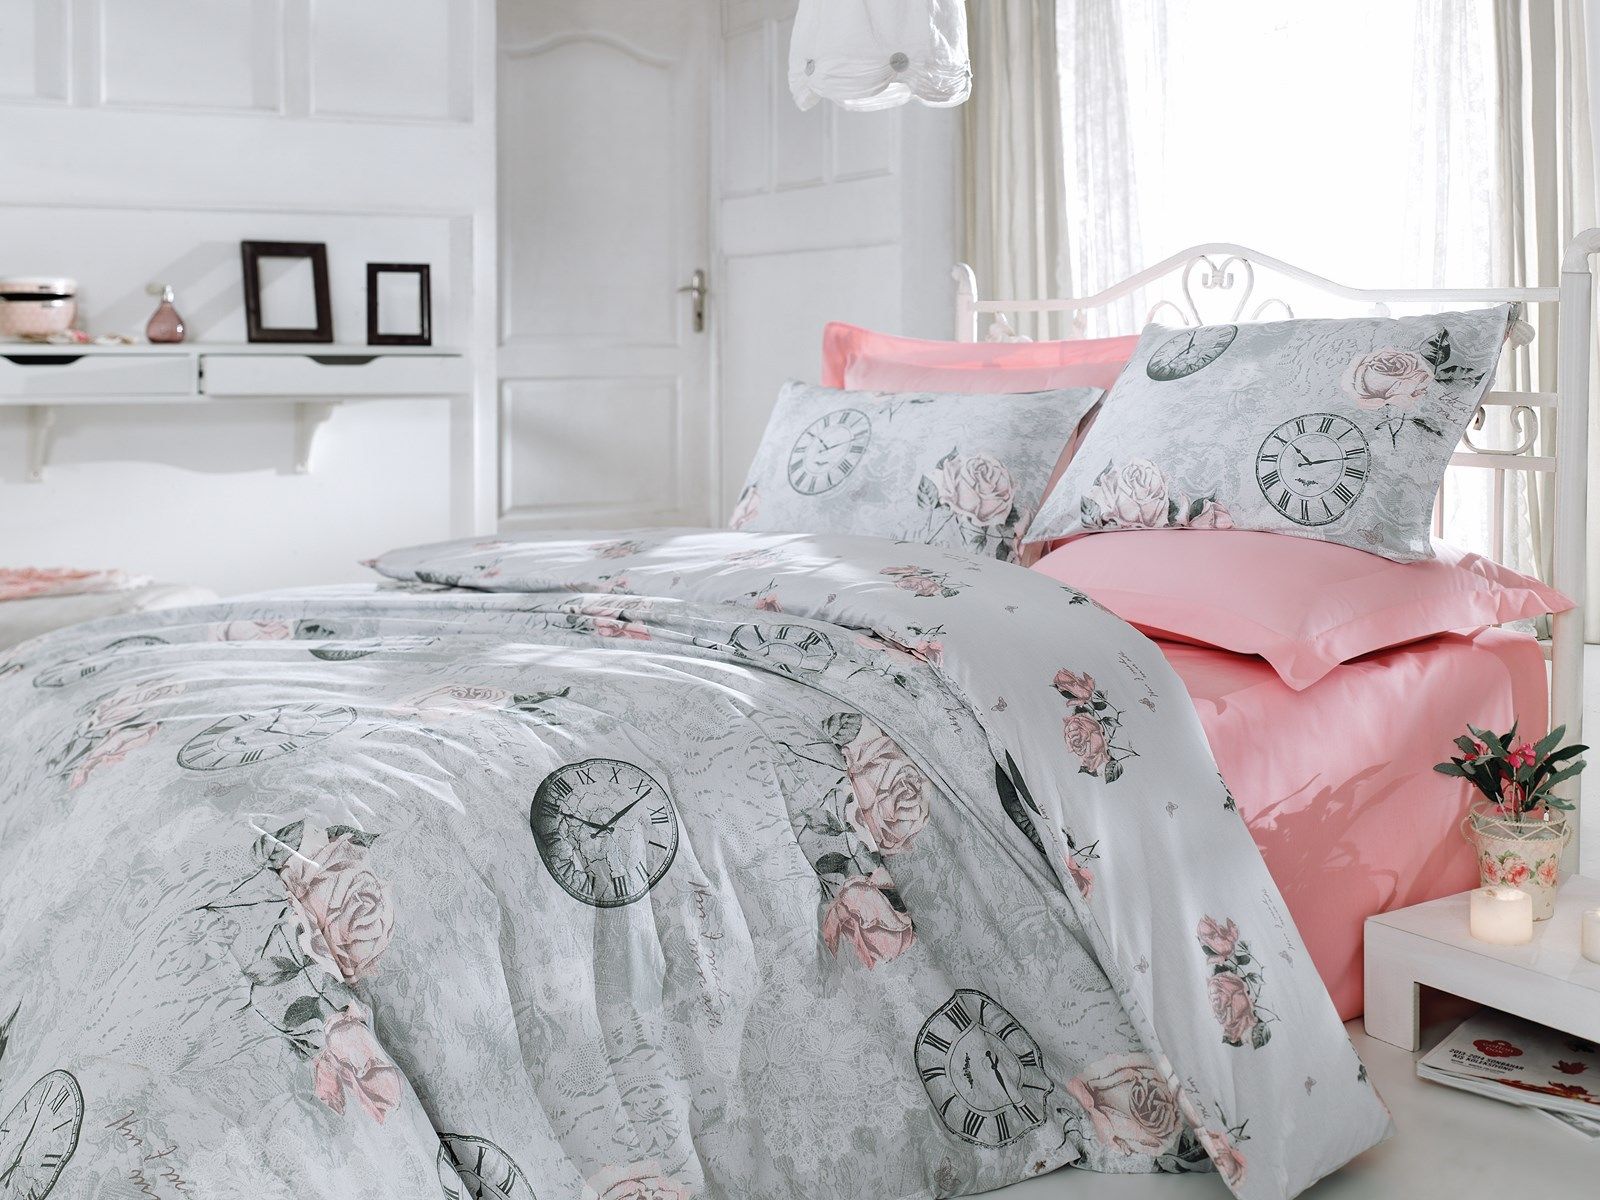 Bed Linen Items2